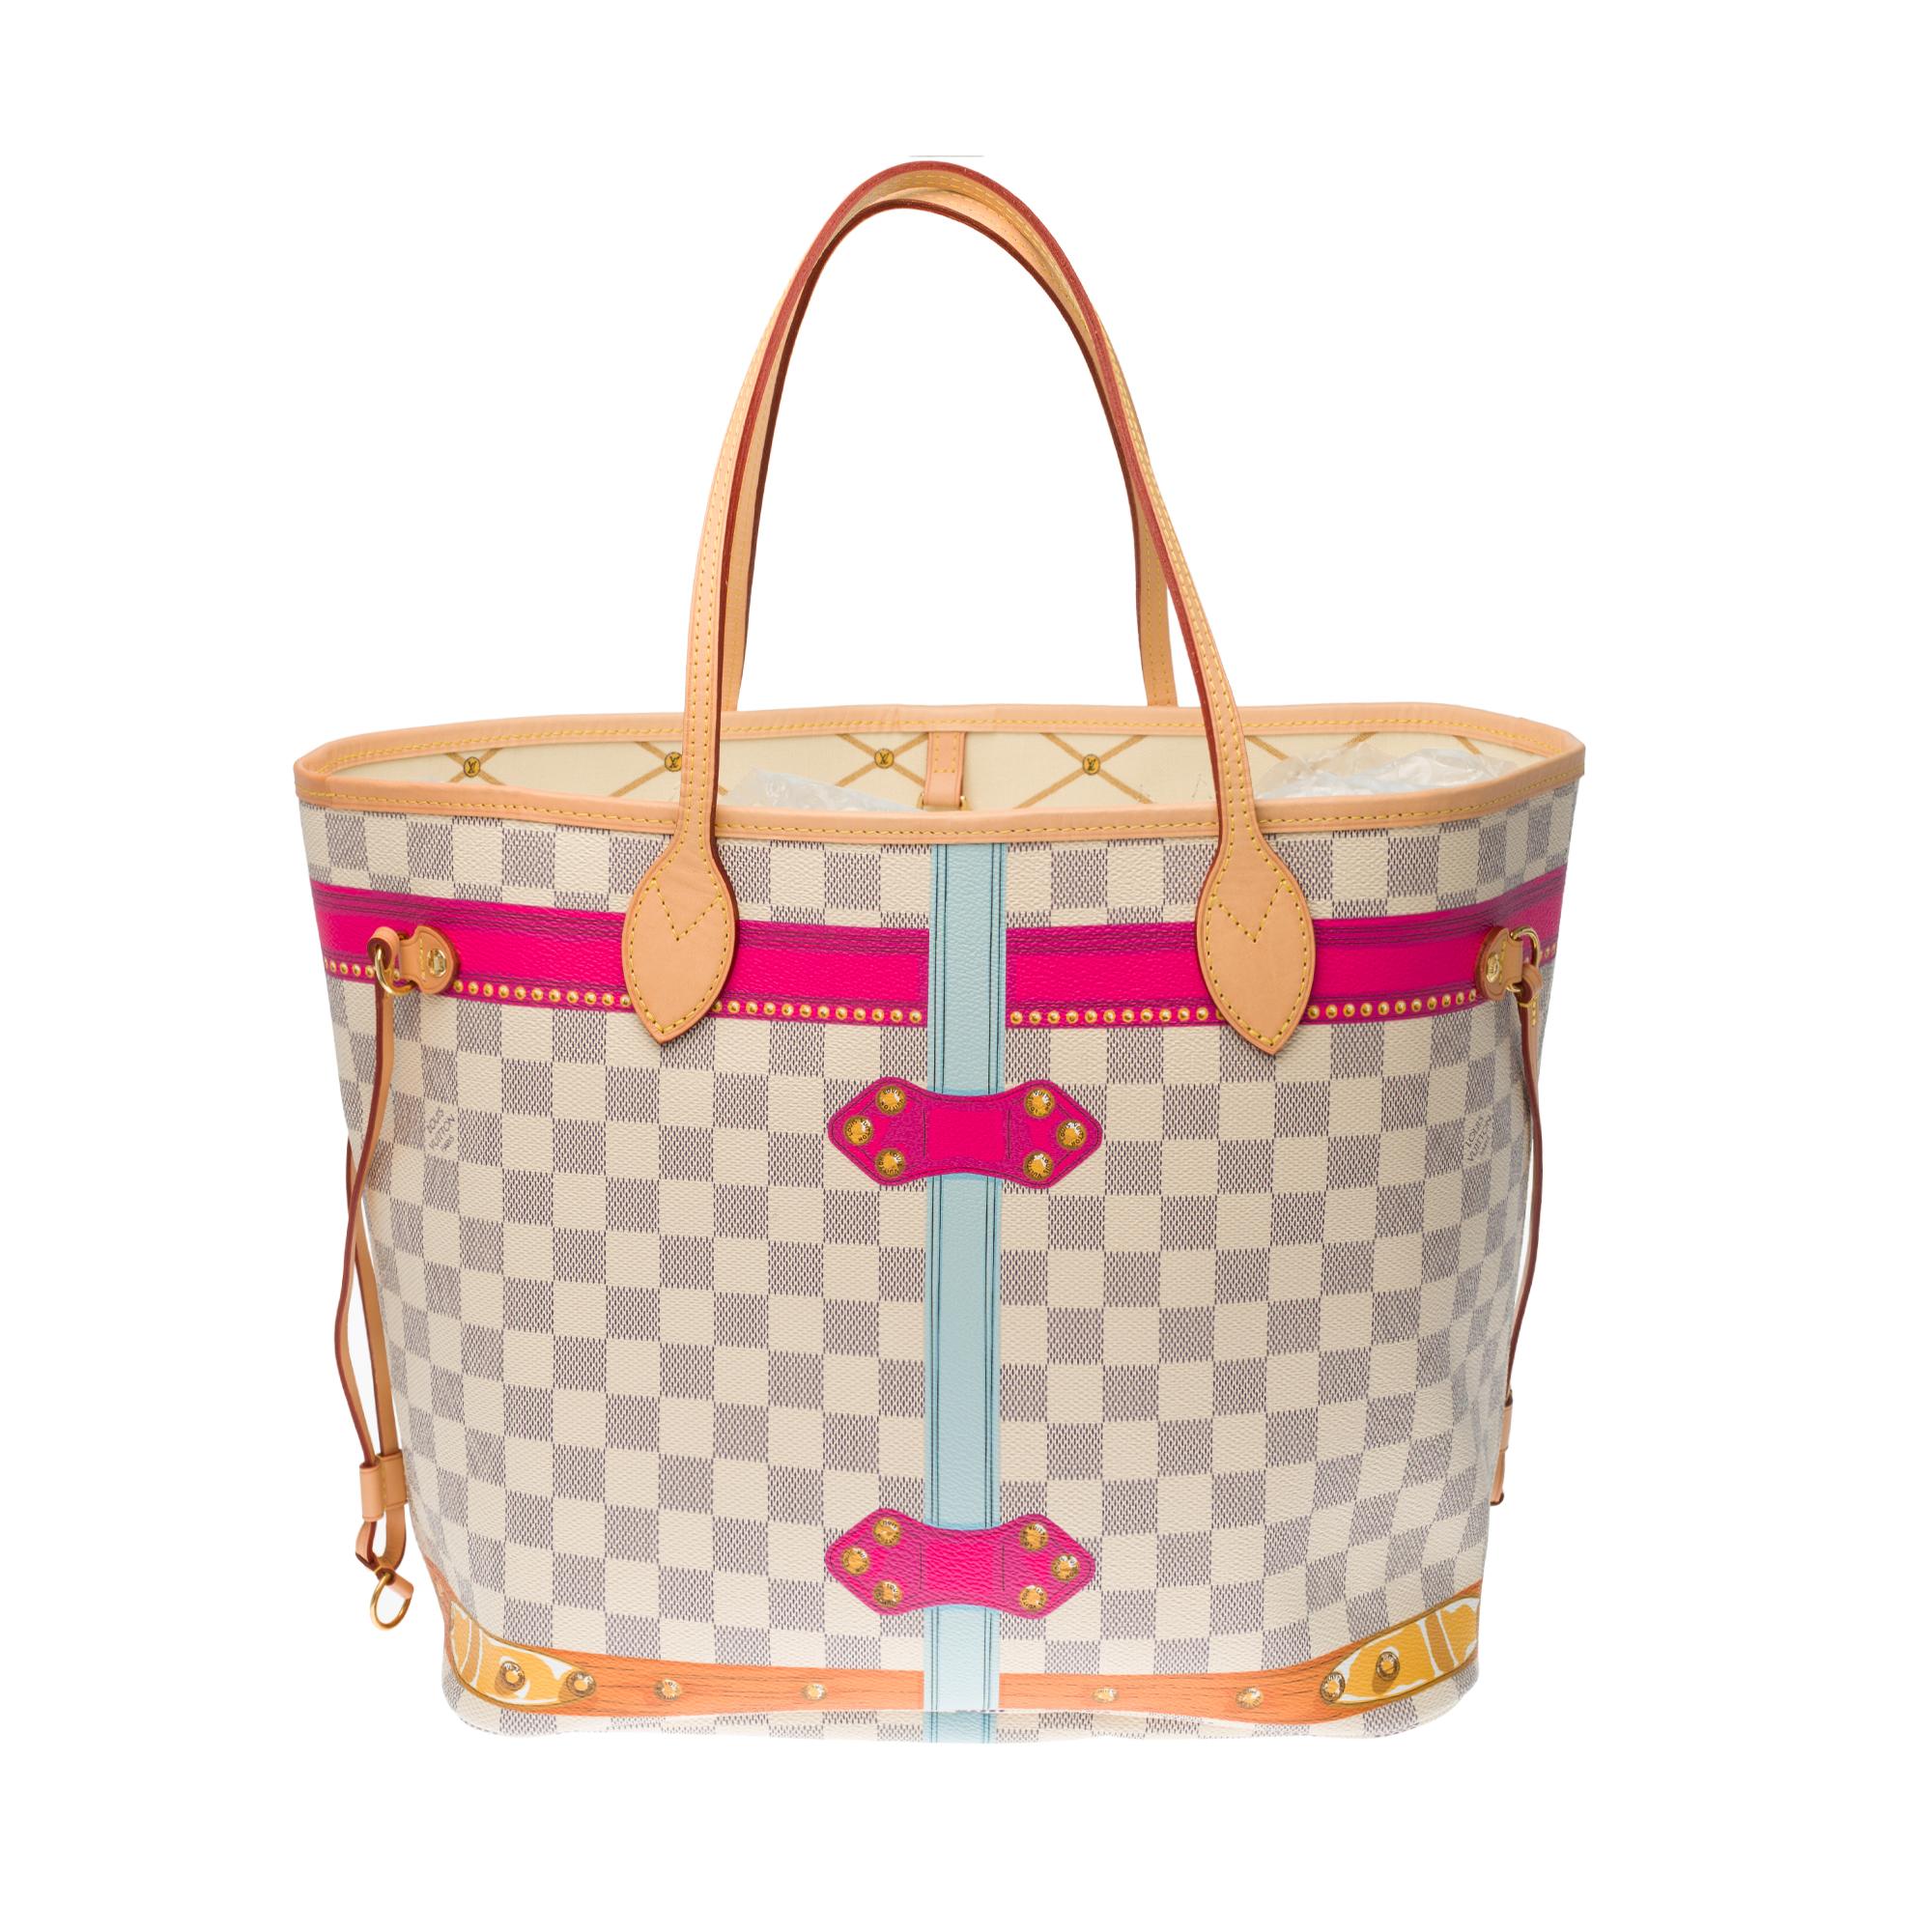 NEW - COLLECTOR - Limited Edition Saint-Tropez 2018

Beautiful Shopping bag Louis Vuitton Neverfull MM in monogram canvas limited series 